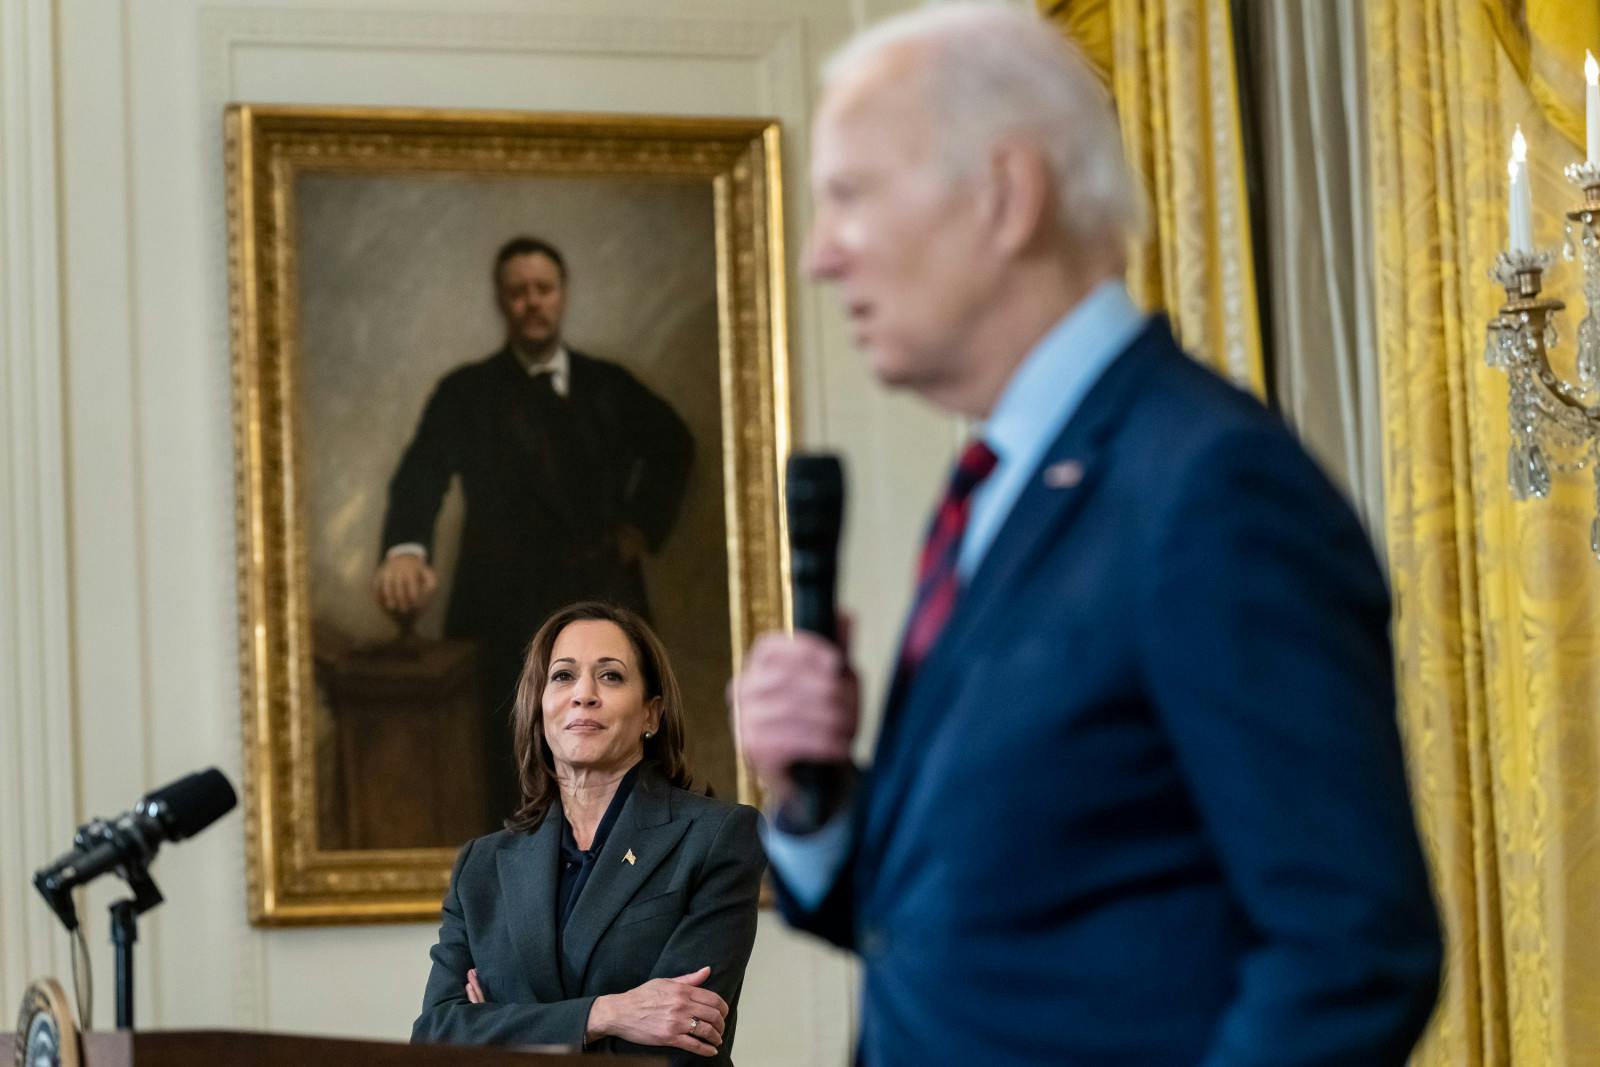 Vice President Kamala Harris looks on as President Joe Biden delivers remarks at a reception for new members of congress, Tuesday, January 24, 2023, in the East Room of the White House (Official White House Photo by Erin Scott)